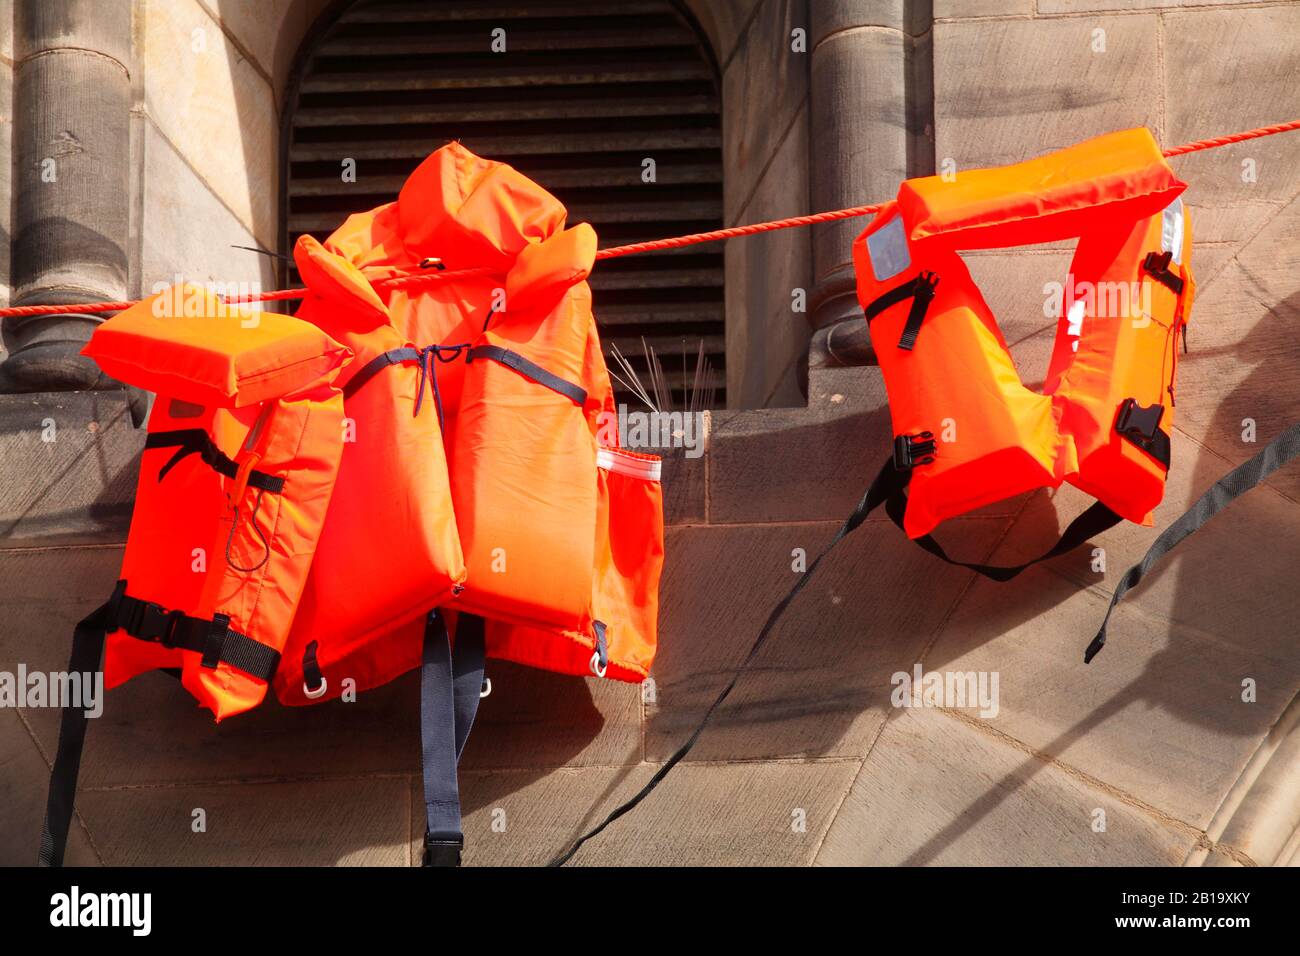 Orange life jackets as a memorial at Bremen Cathedral, Bremen, Germany Stock Photo